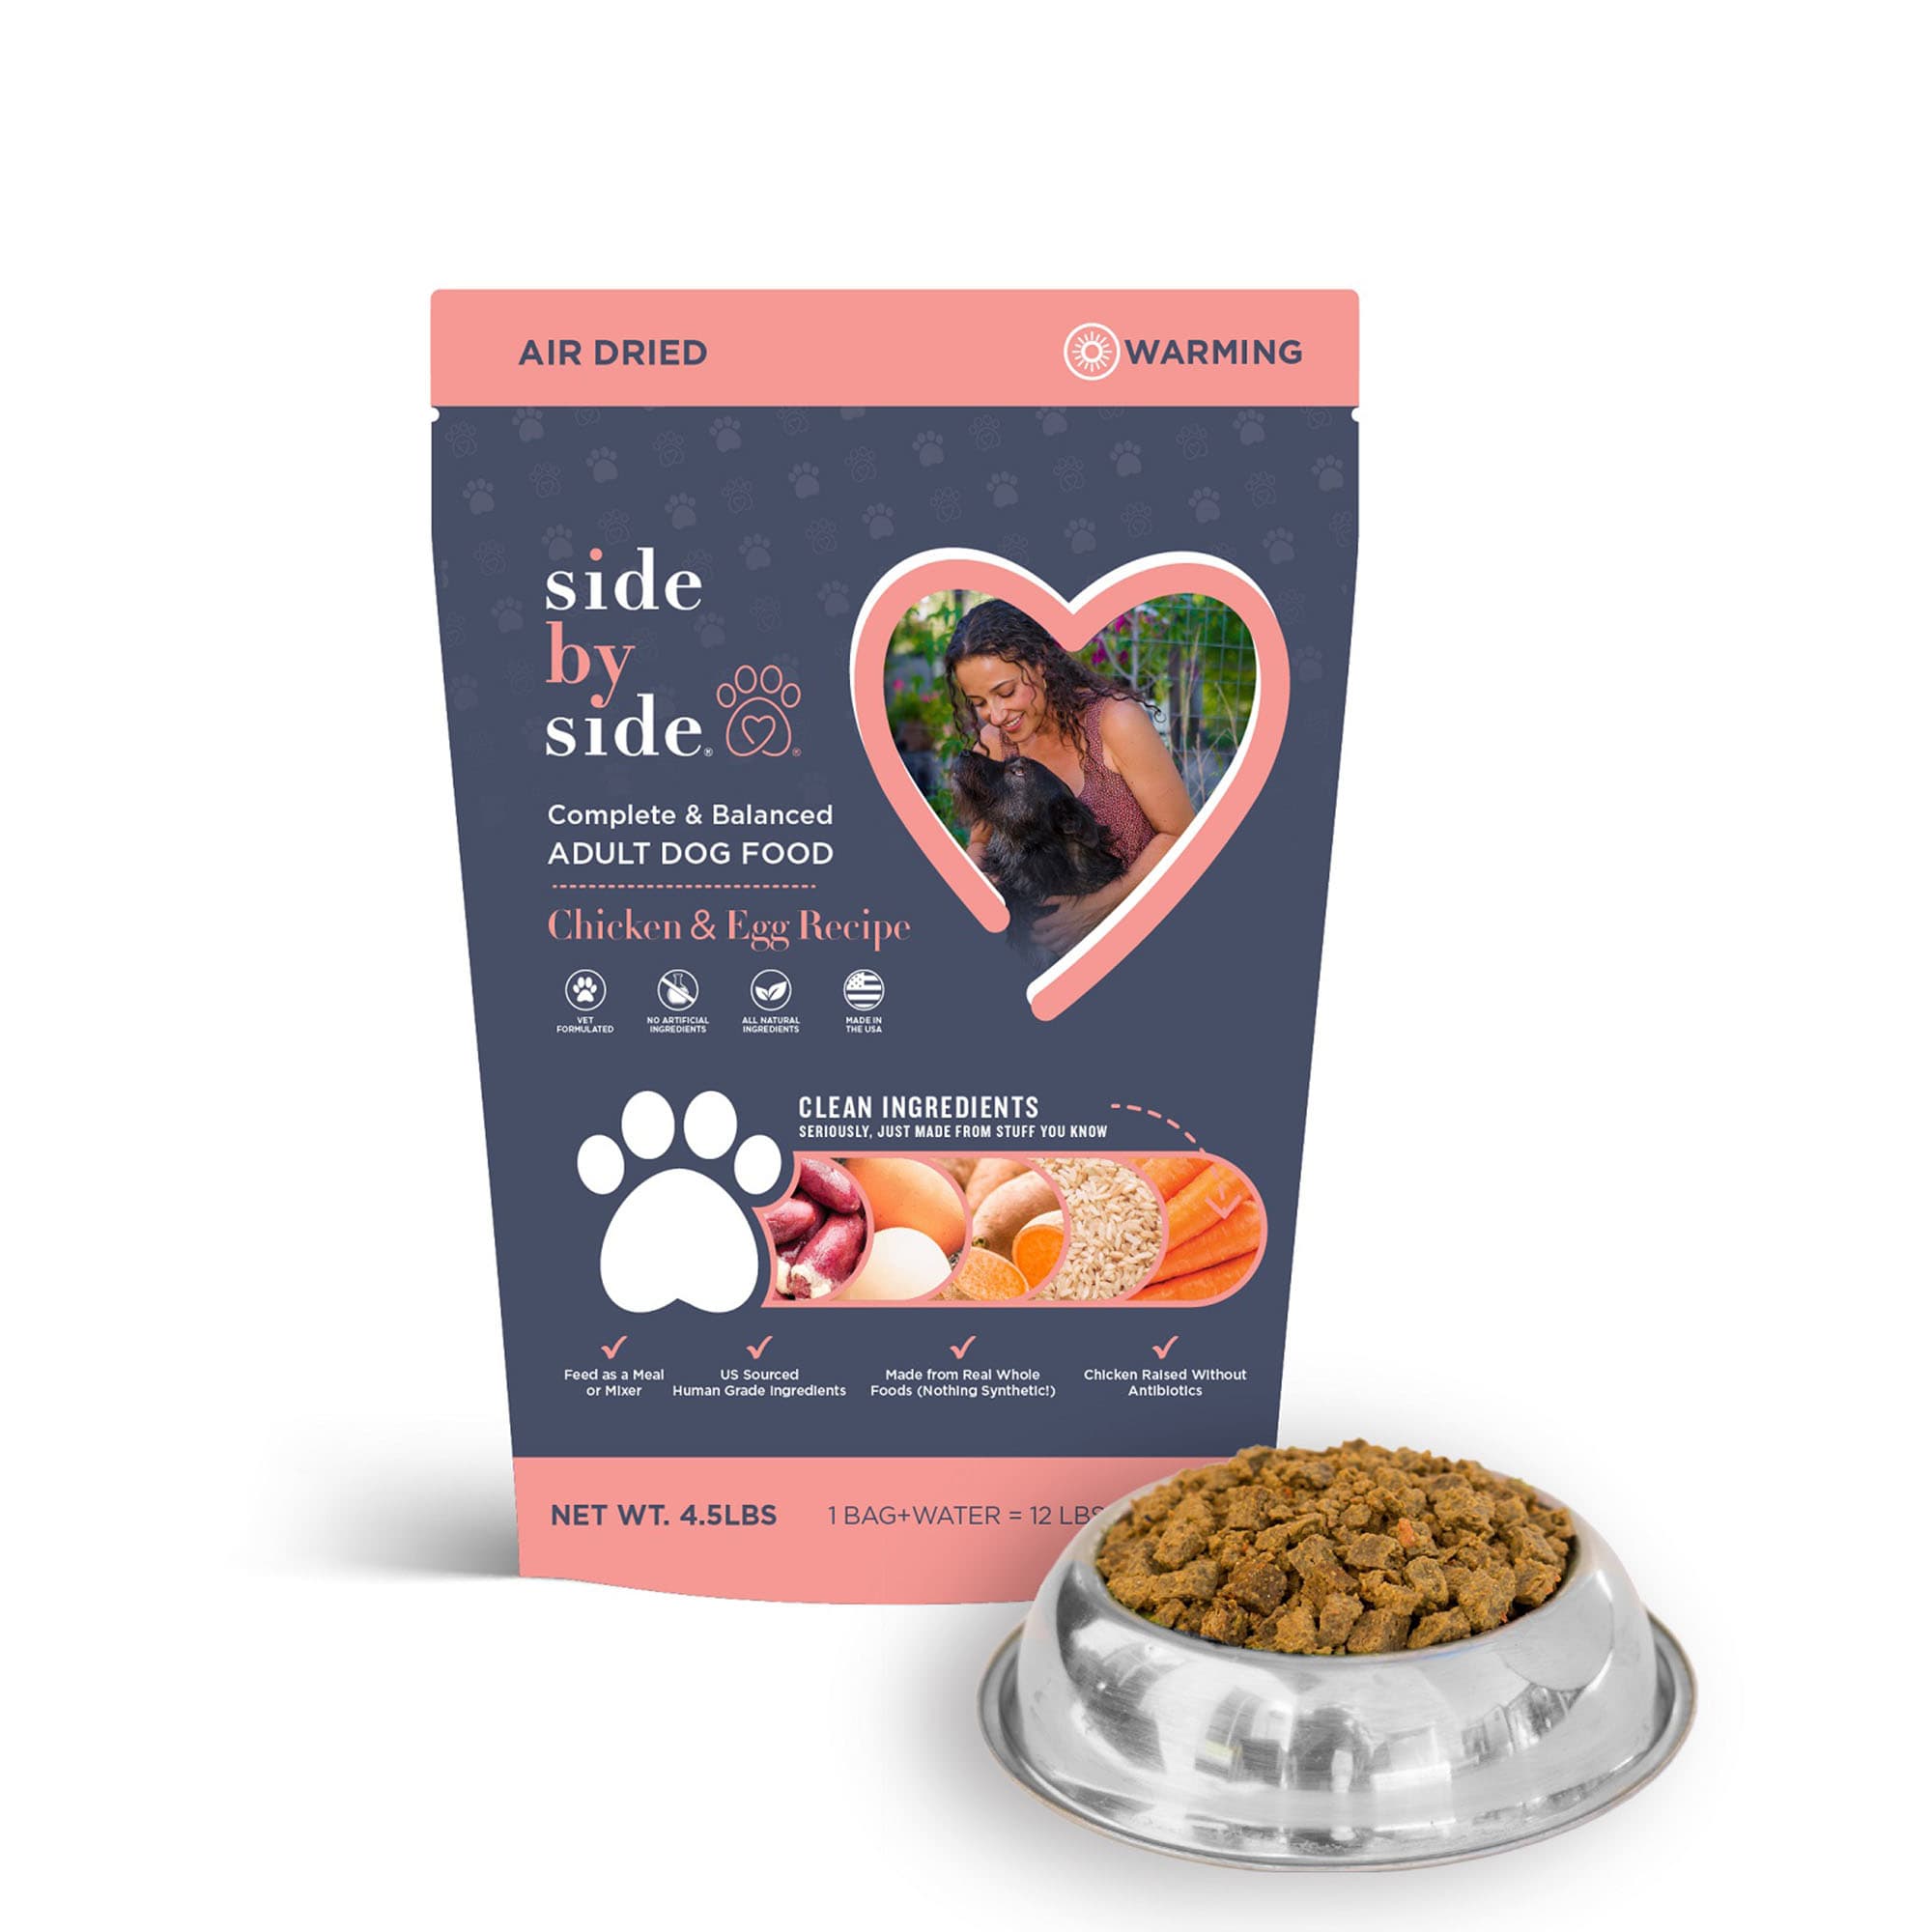 Side by Side Warming Air Dried Chicken & Egg Recipe Dry Dog Food